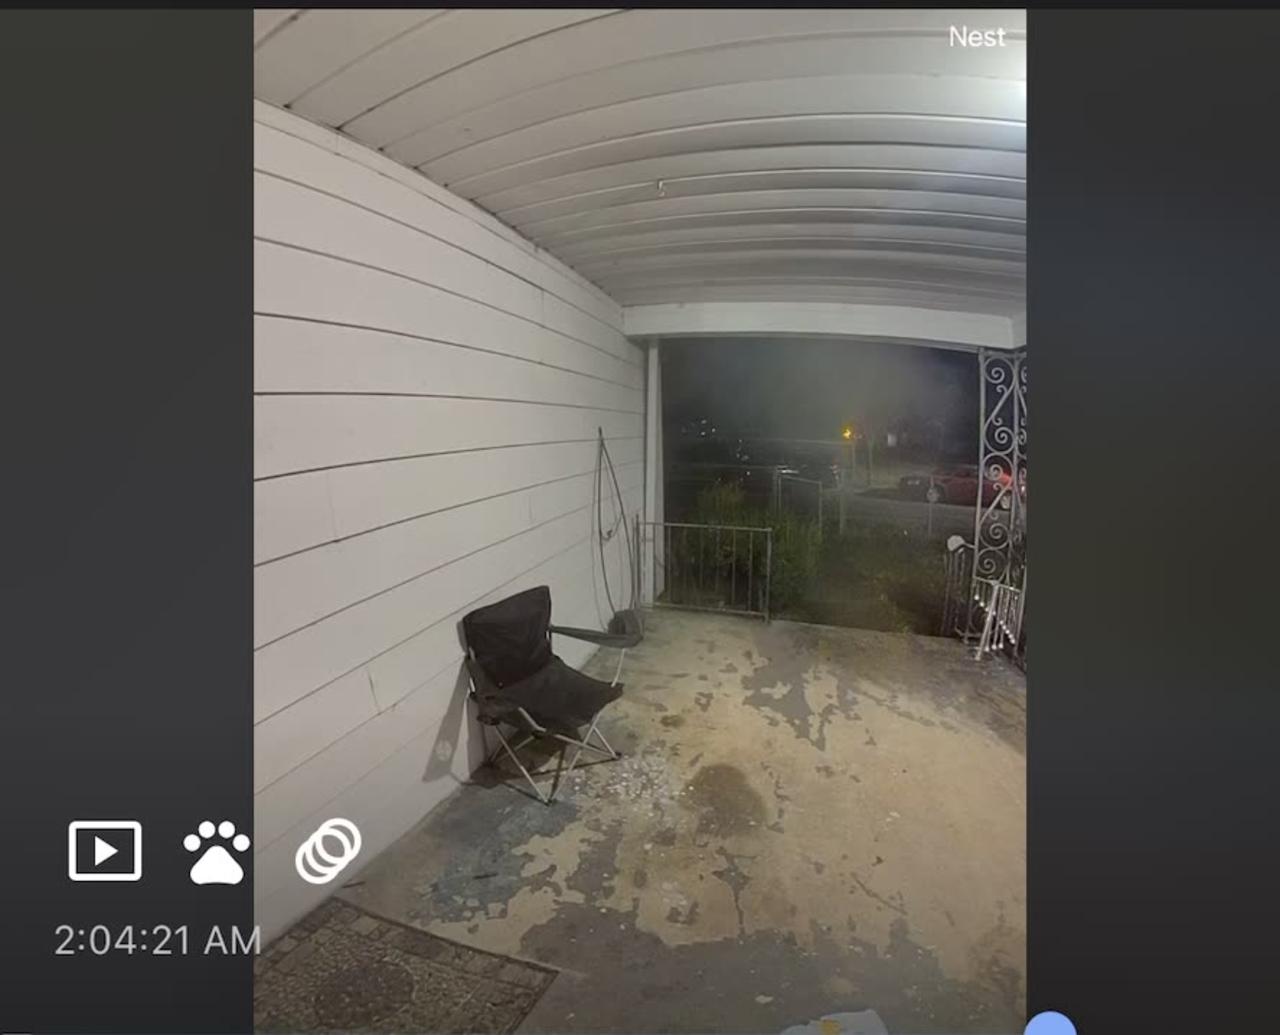 Neighbor's Dog Steals Package Off Porch